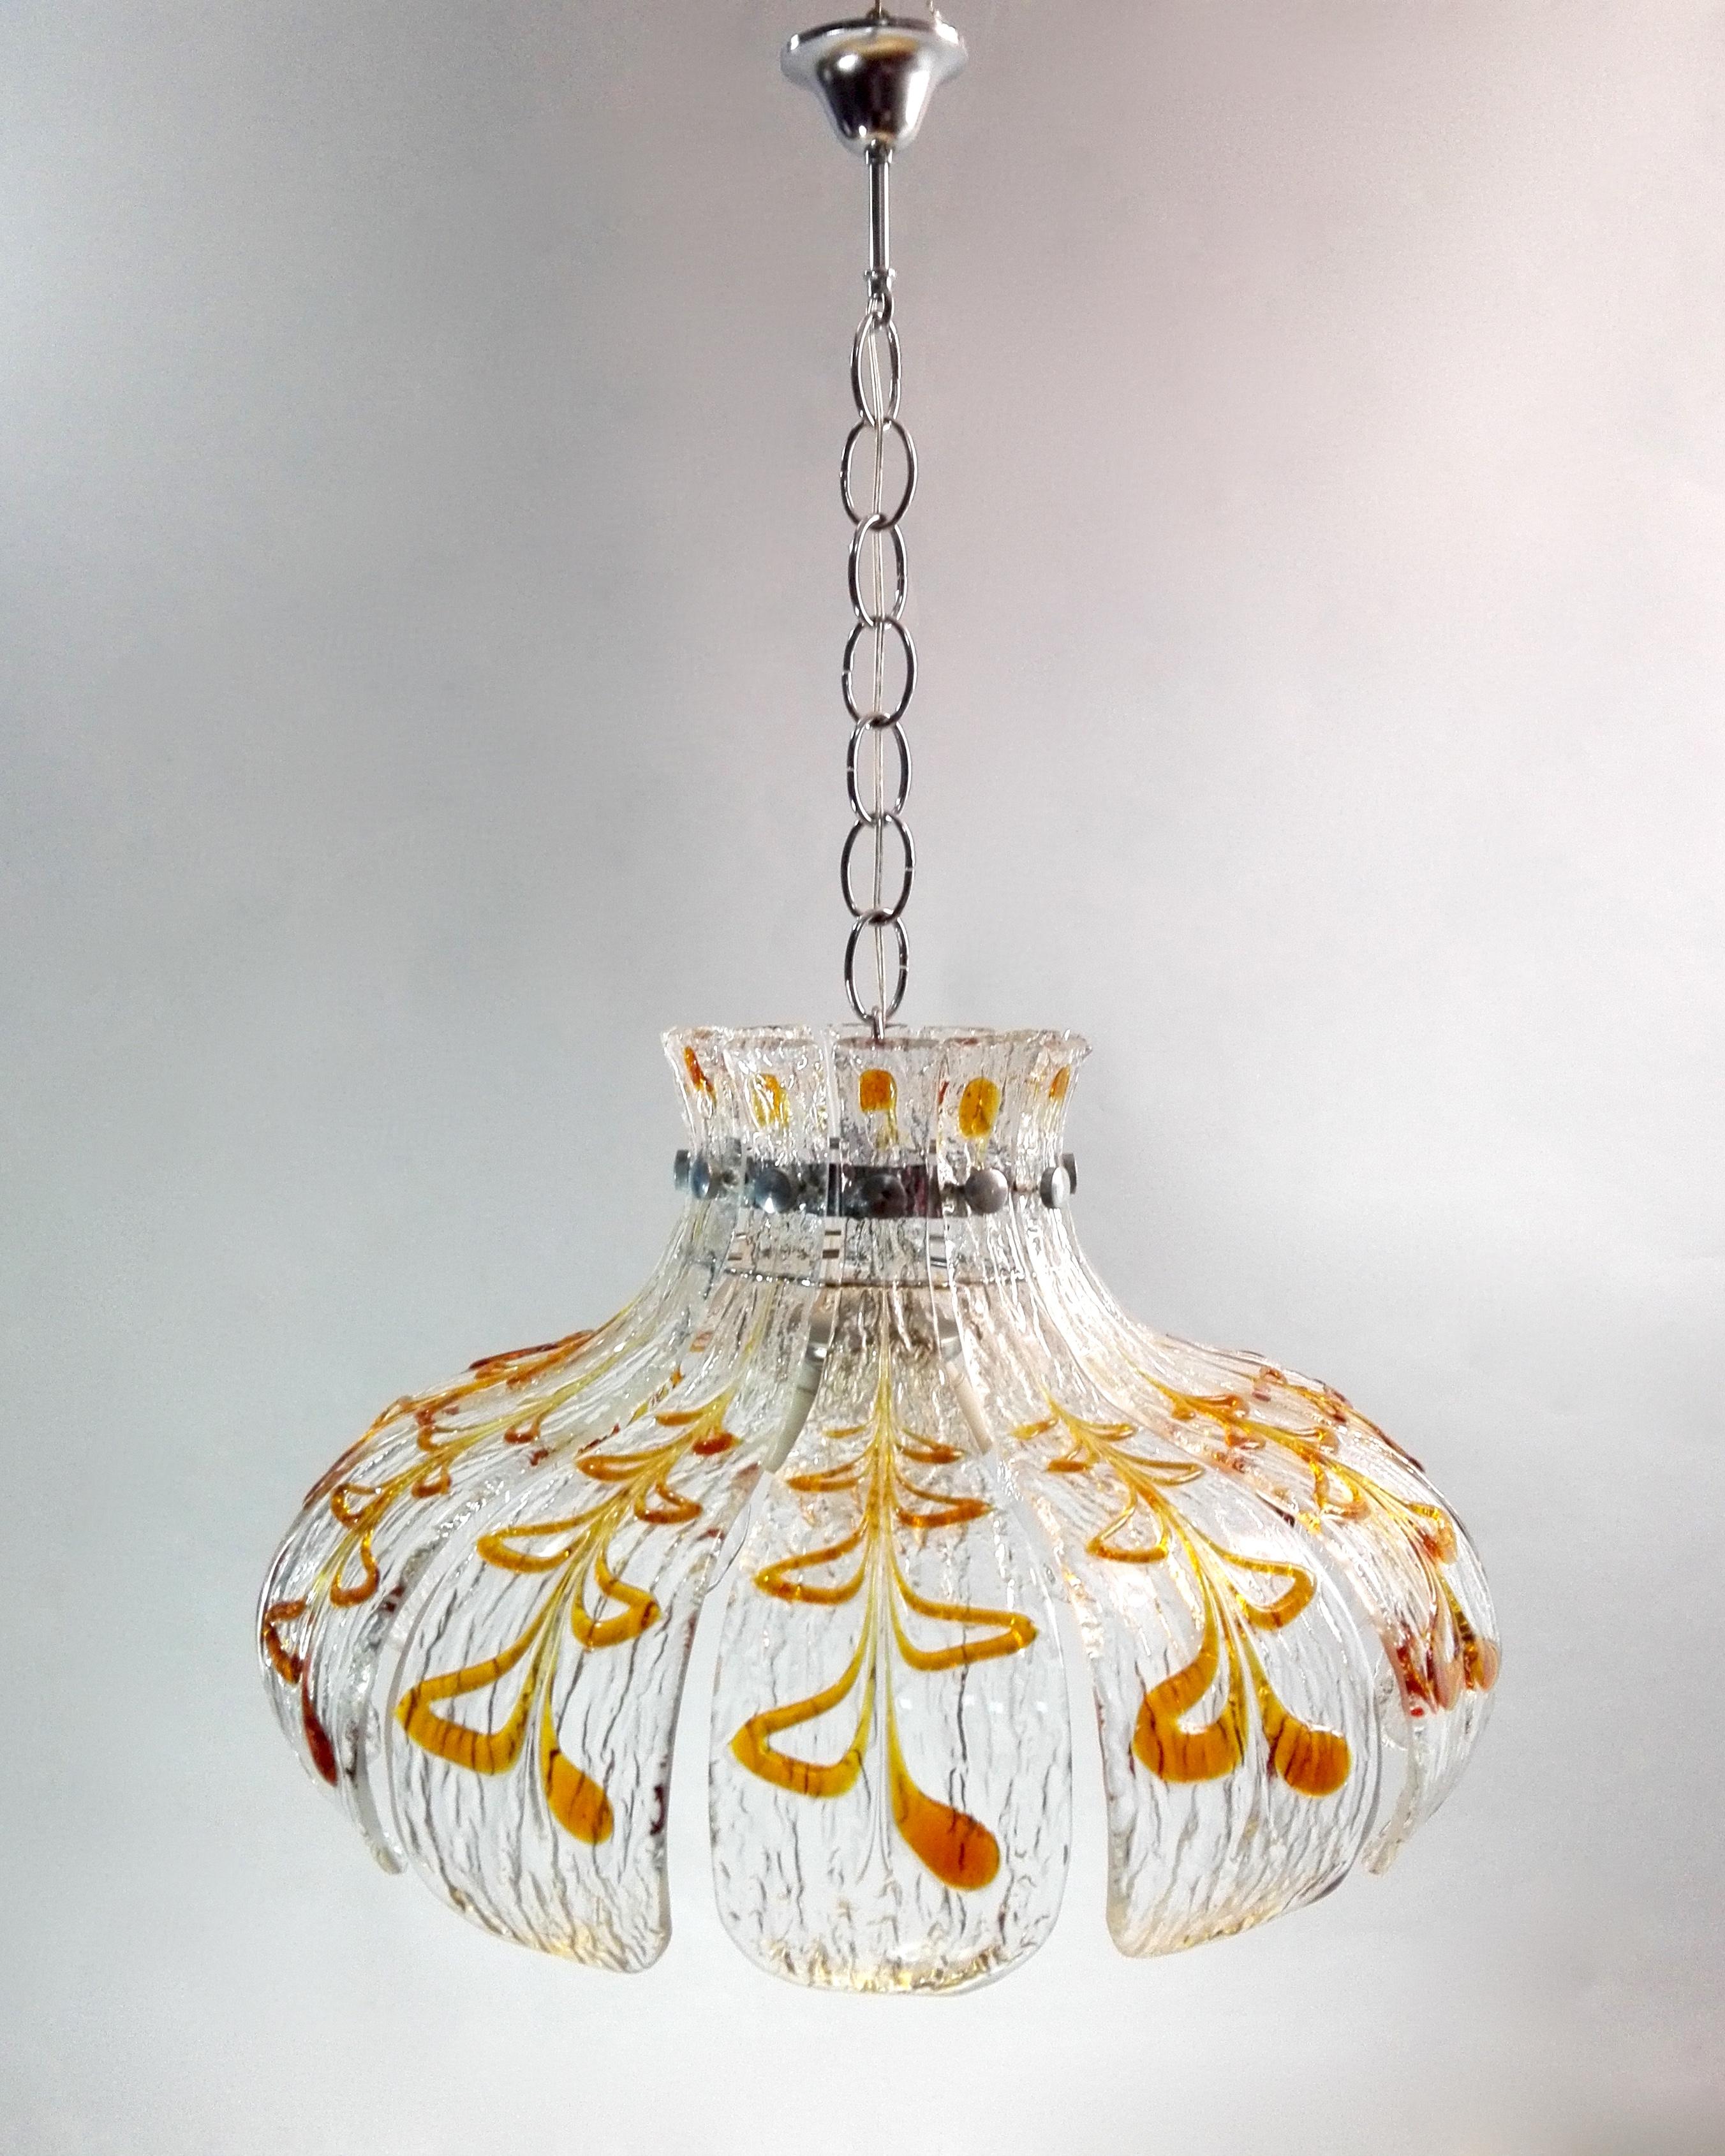 Hand-Crafted 1970s Carlo Nason Murano Hand-Blown Glass Four-Light Flower-Shaped Chandelier For Sale